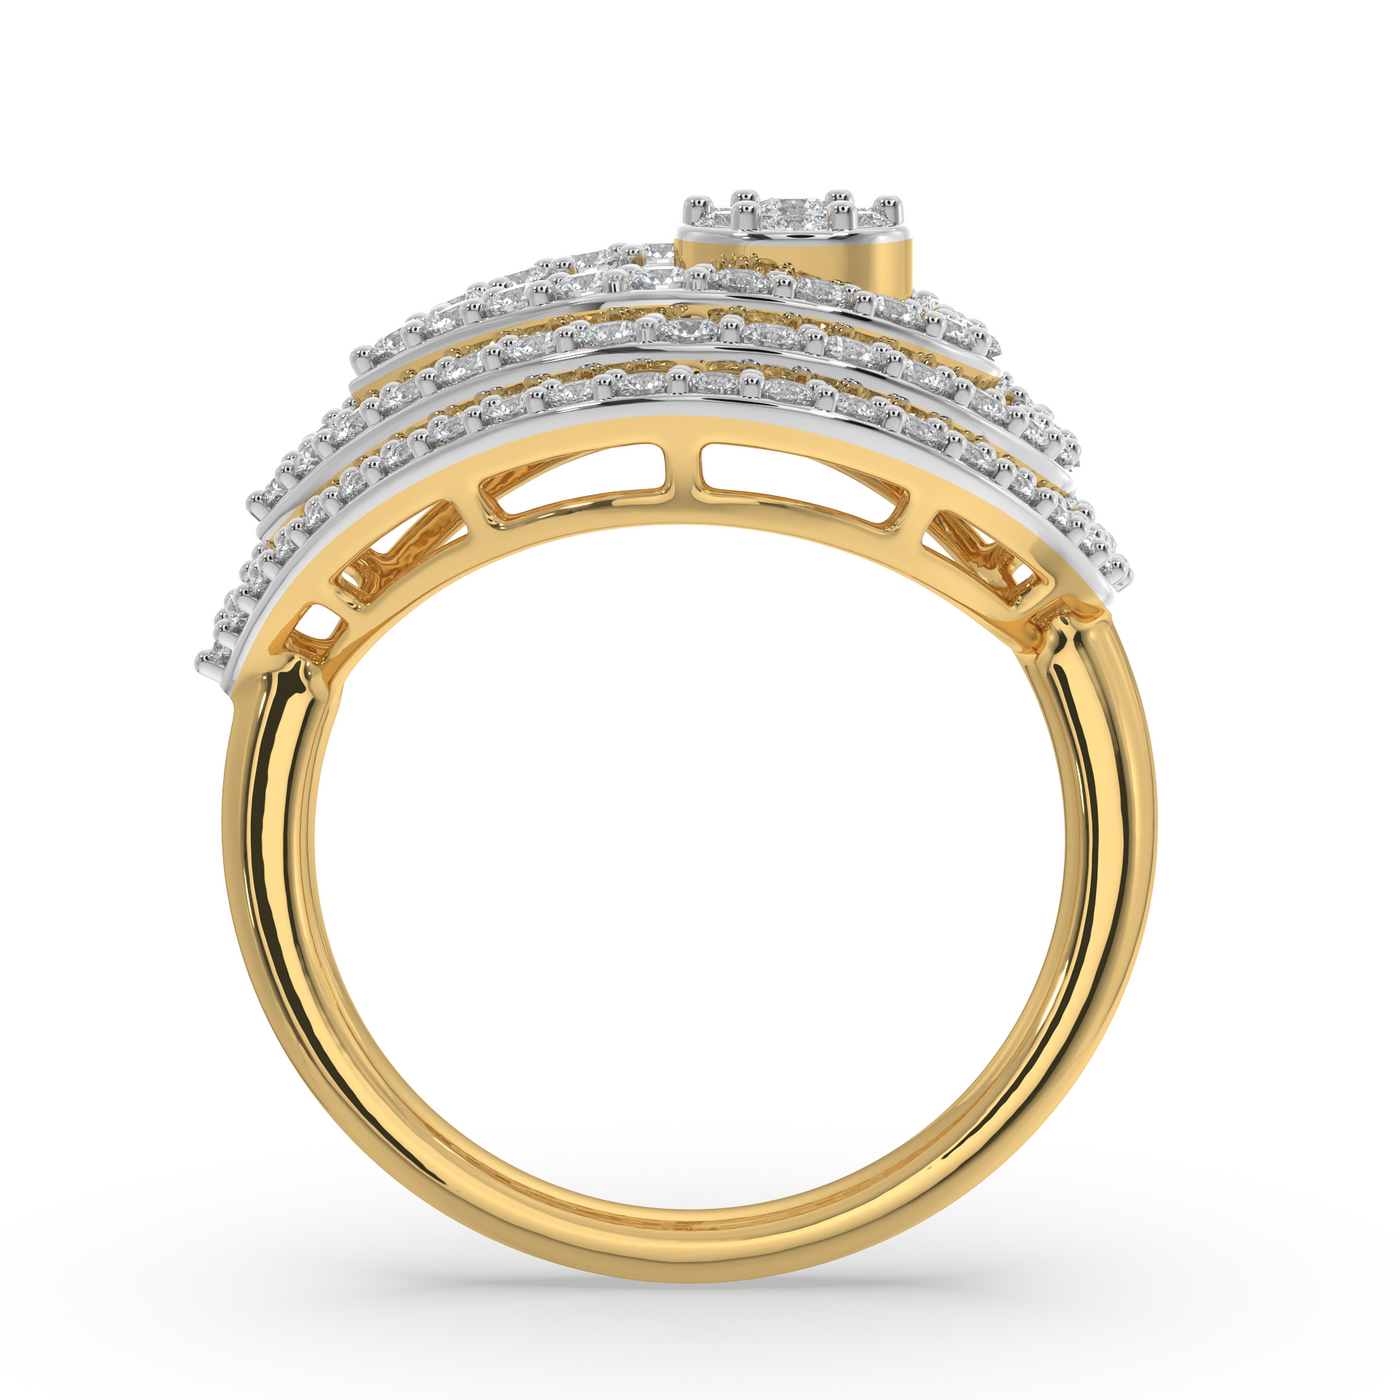 SY Women's Ring in Gold, Pave Setting